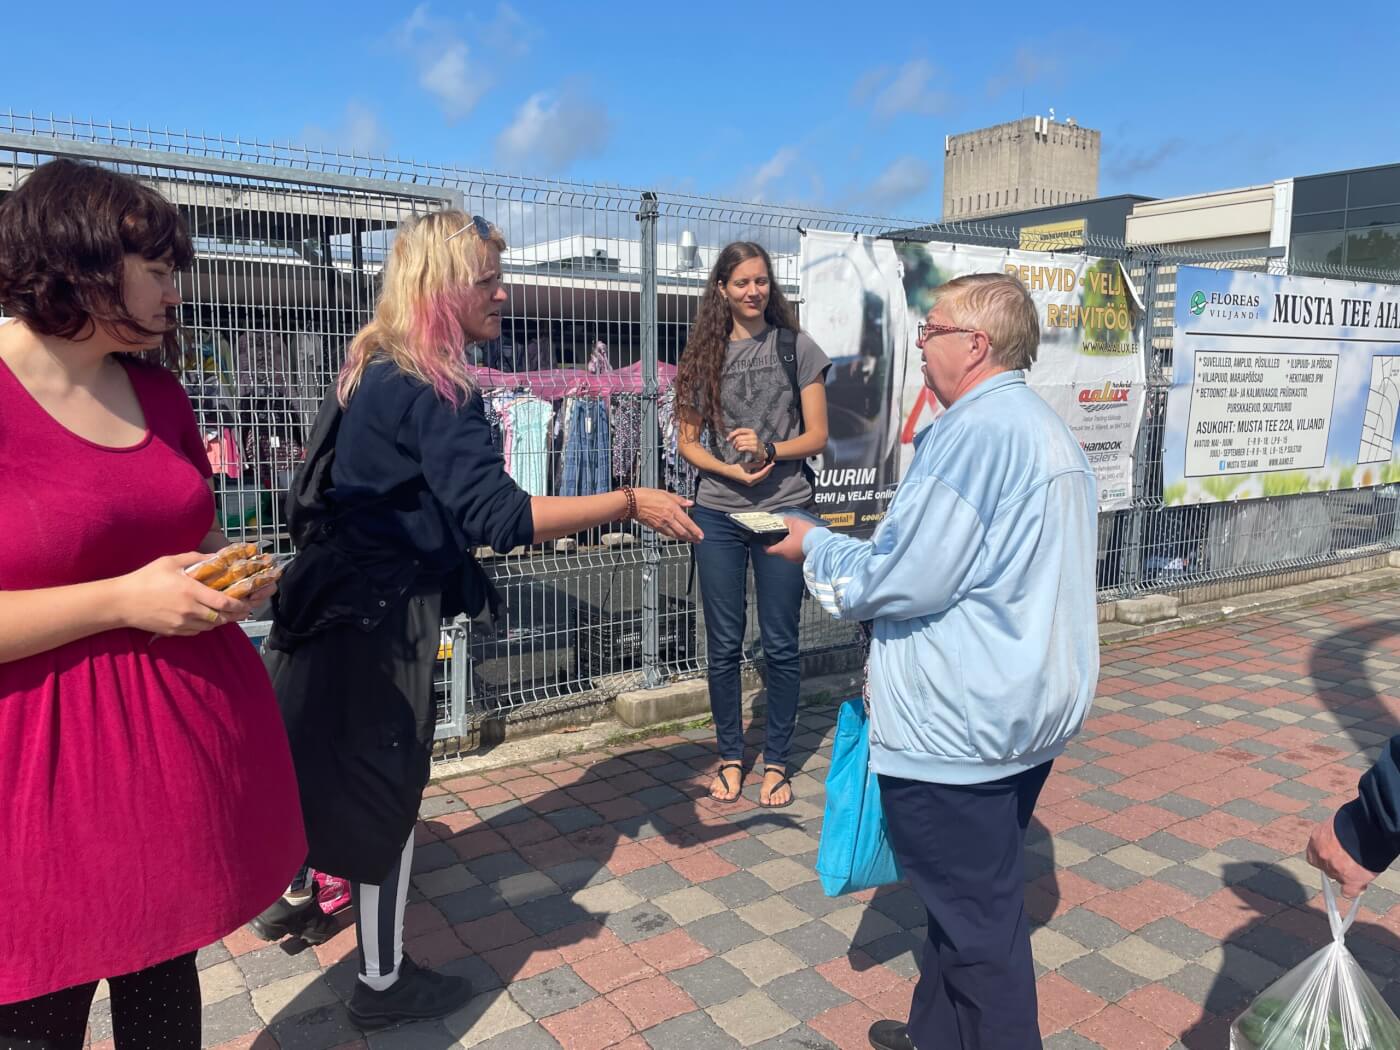 With the support of PETA’s Global Compassion Fund, animal rights activists distributed delicious, free vegan food at a market in Viljandi, Estonia, to encourage shoppers to embrace animal-friendly eating.